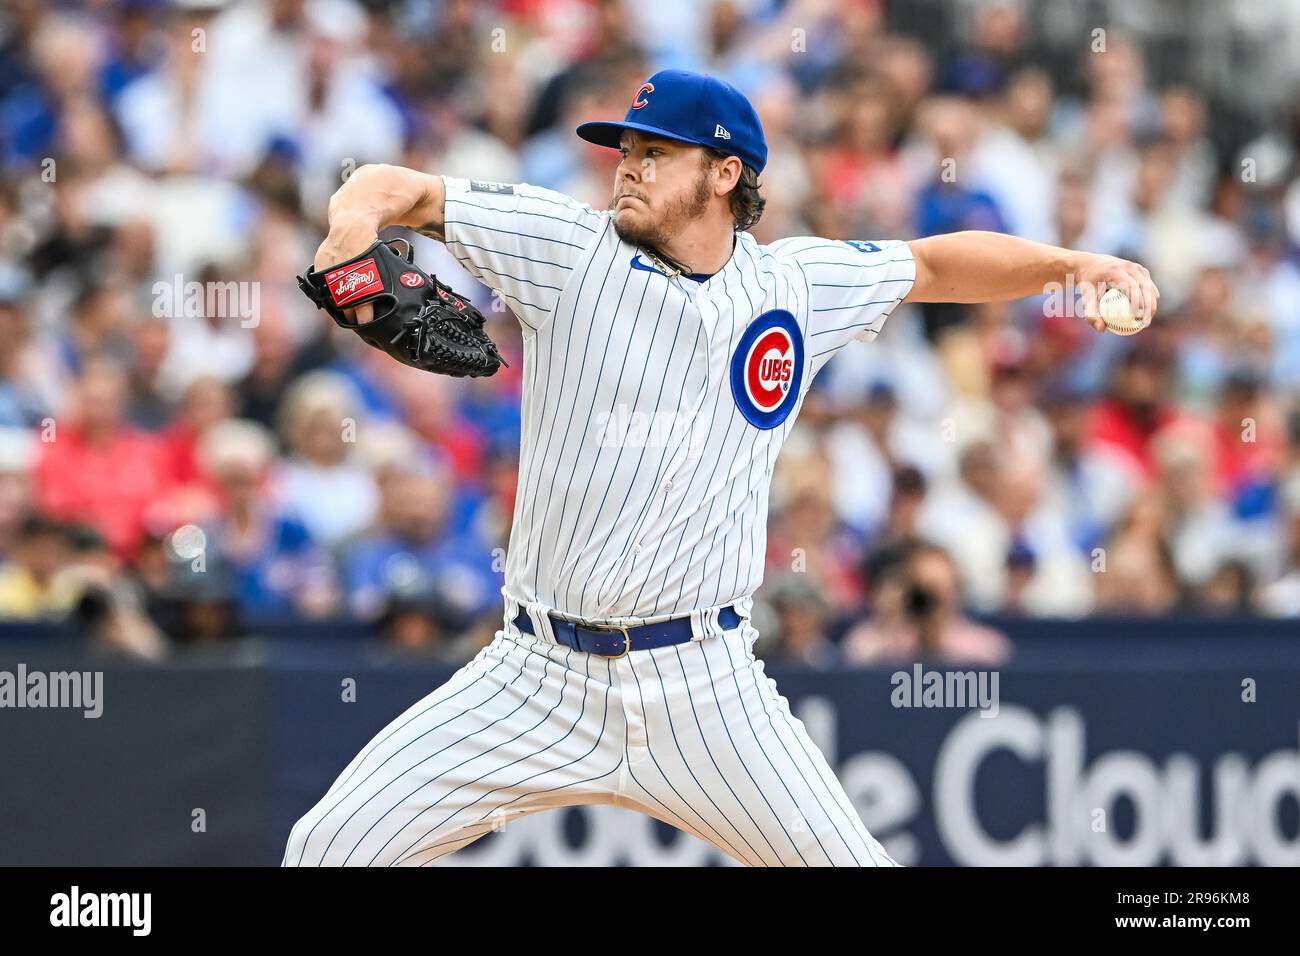 Justin Steele #35 of the Chicago Cubs pitches during the 2023 MLB London  Series match St. Louis Cardinals vs Chicago Cubs at London Stadium, London,  United Kingdom, 24th June 2023 (Photo by